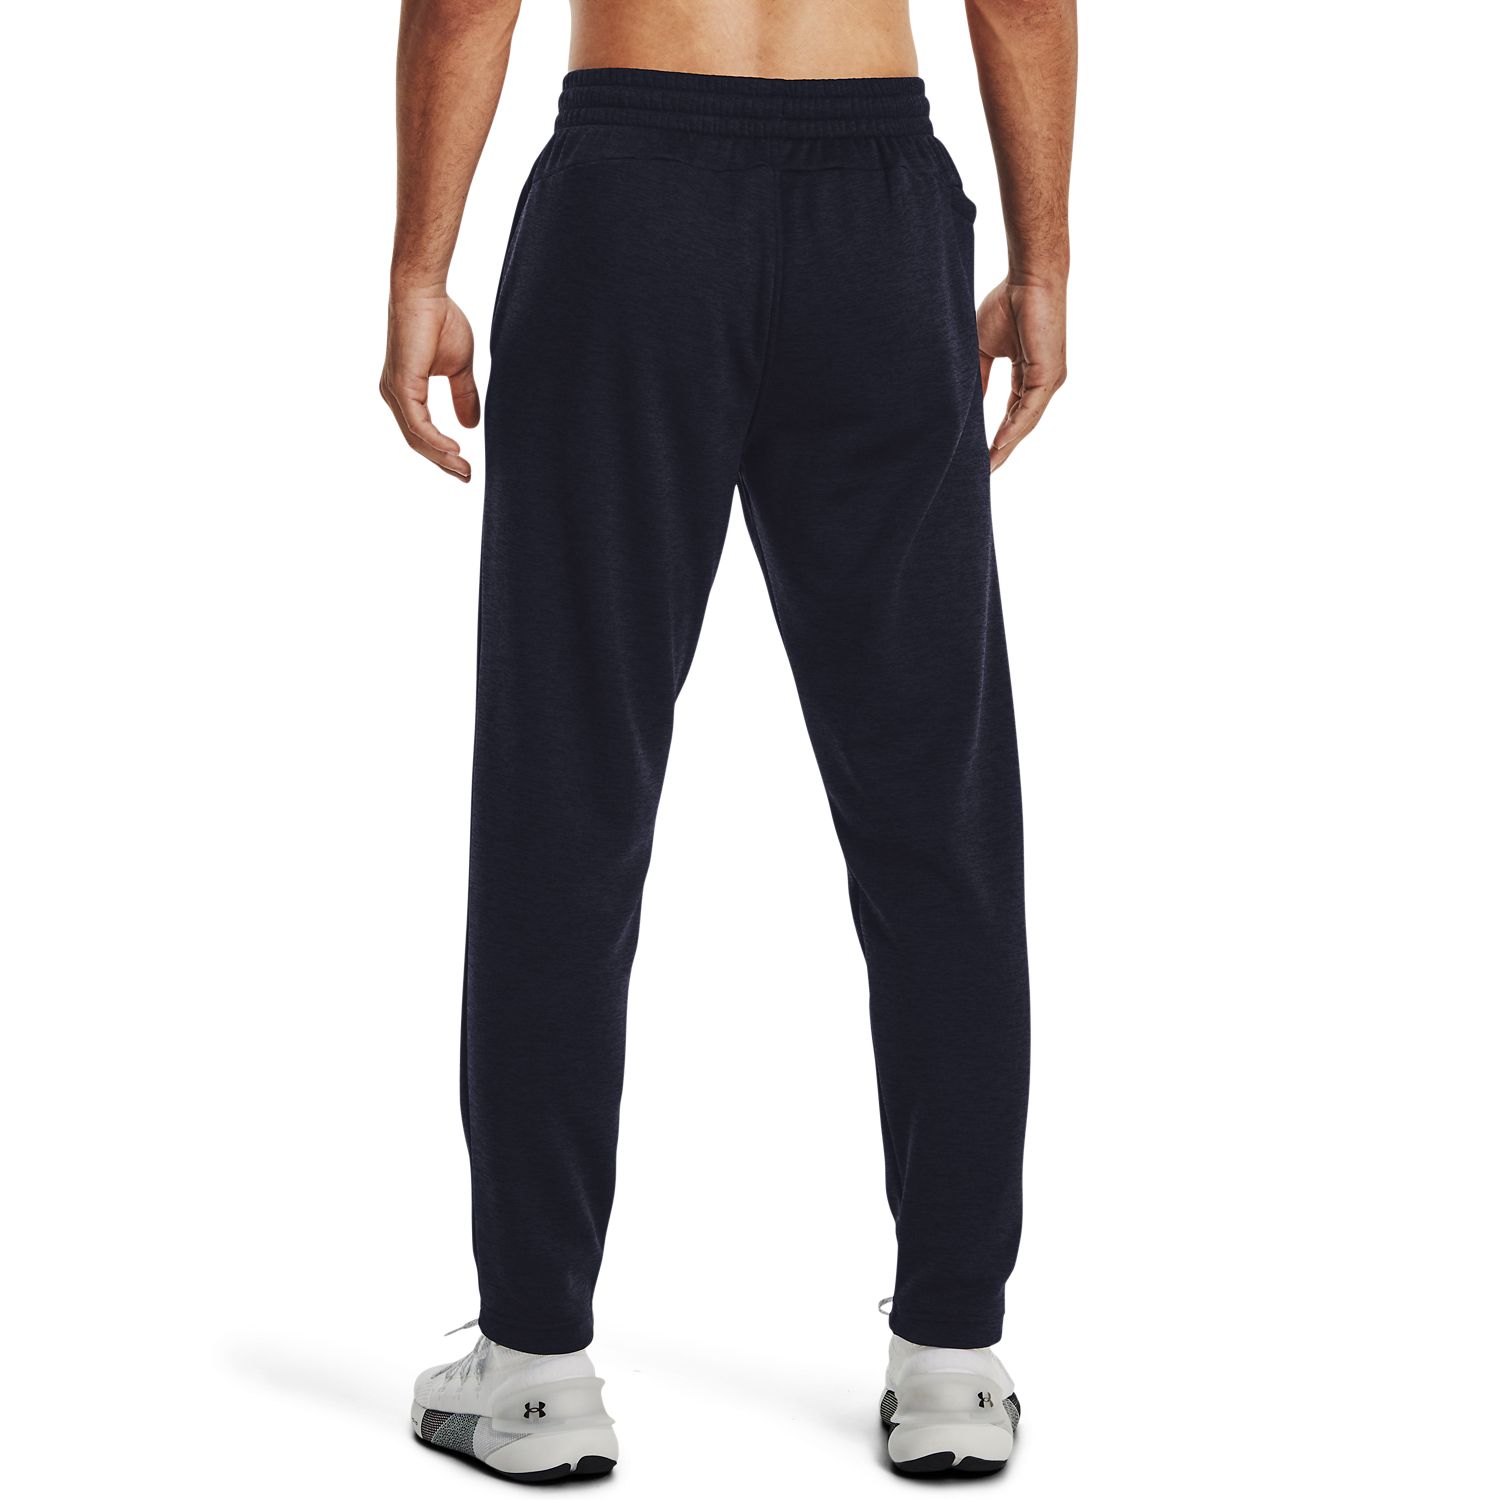 Under Armour HeatGear Dress Pants Men's Gray New with Tags